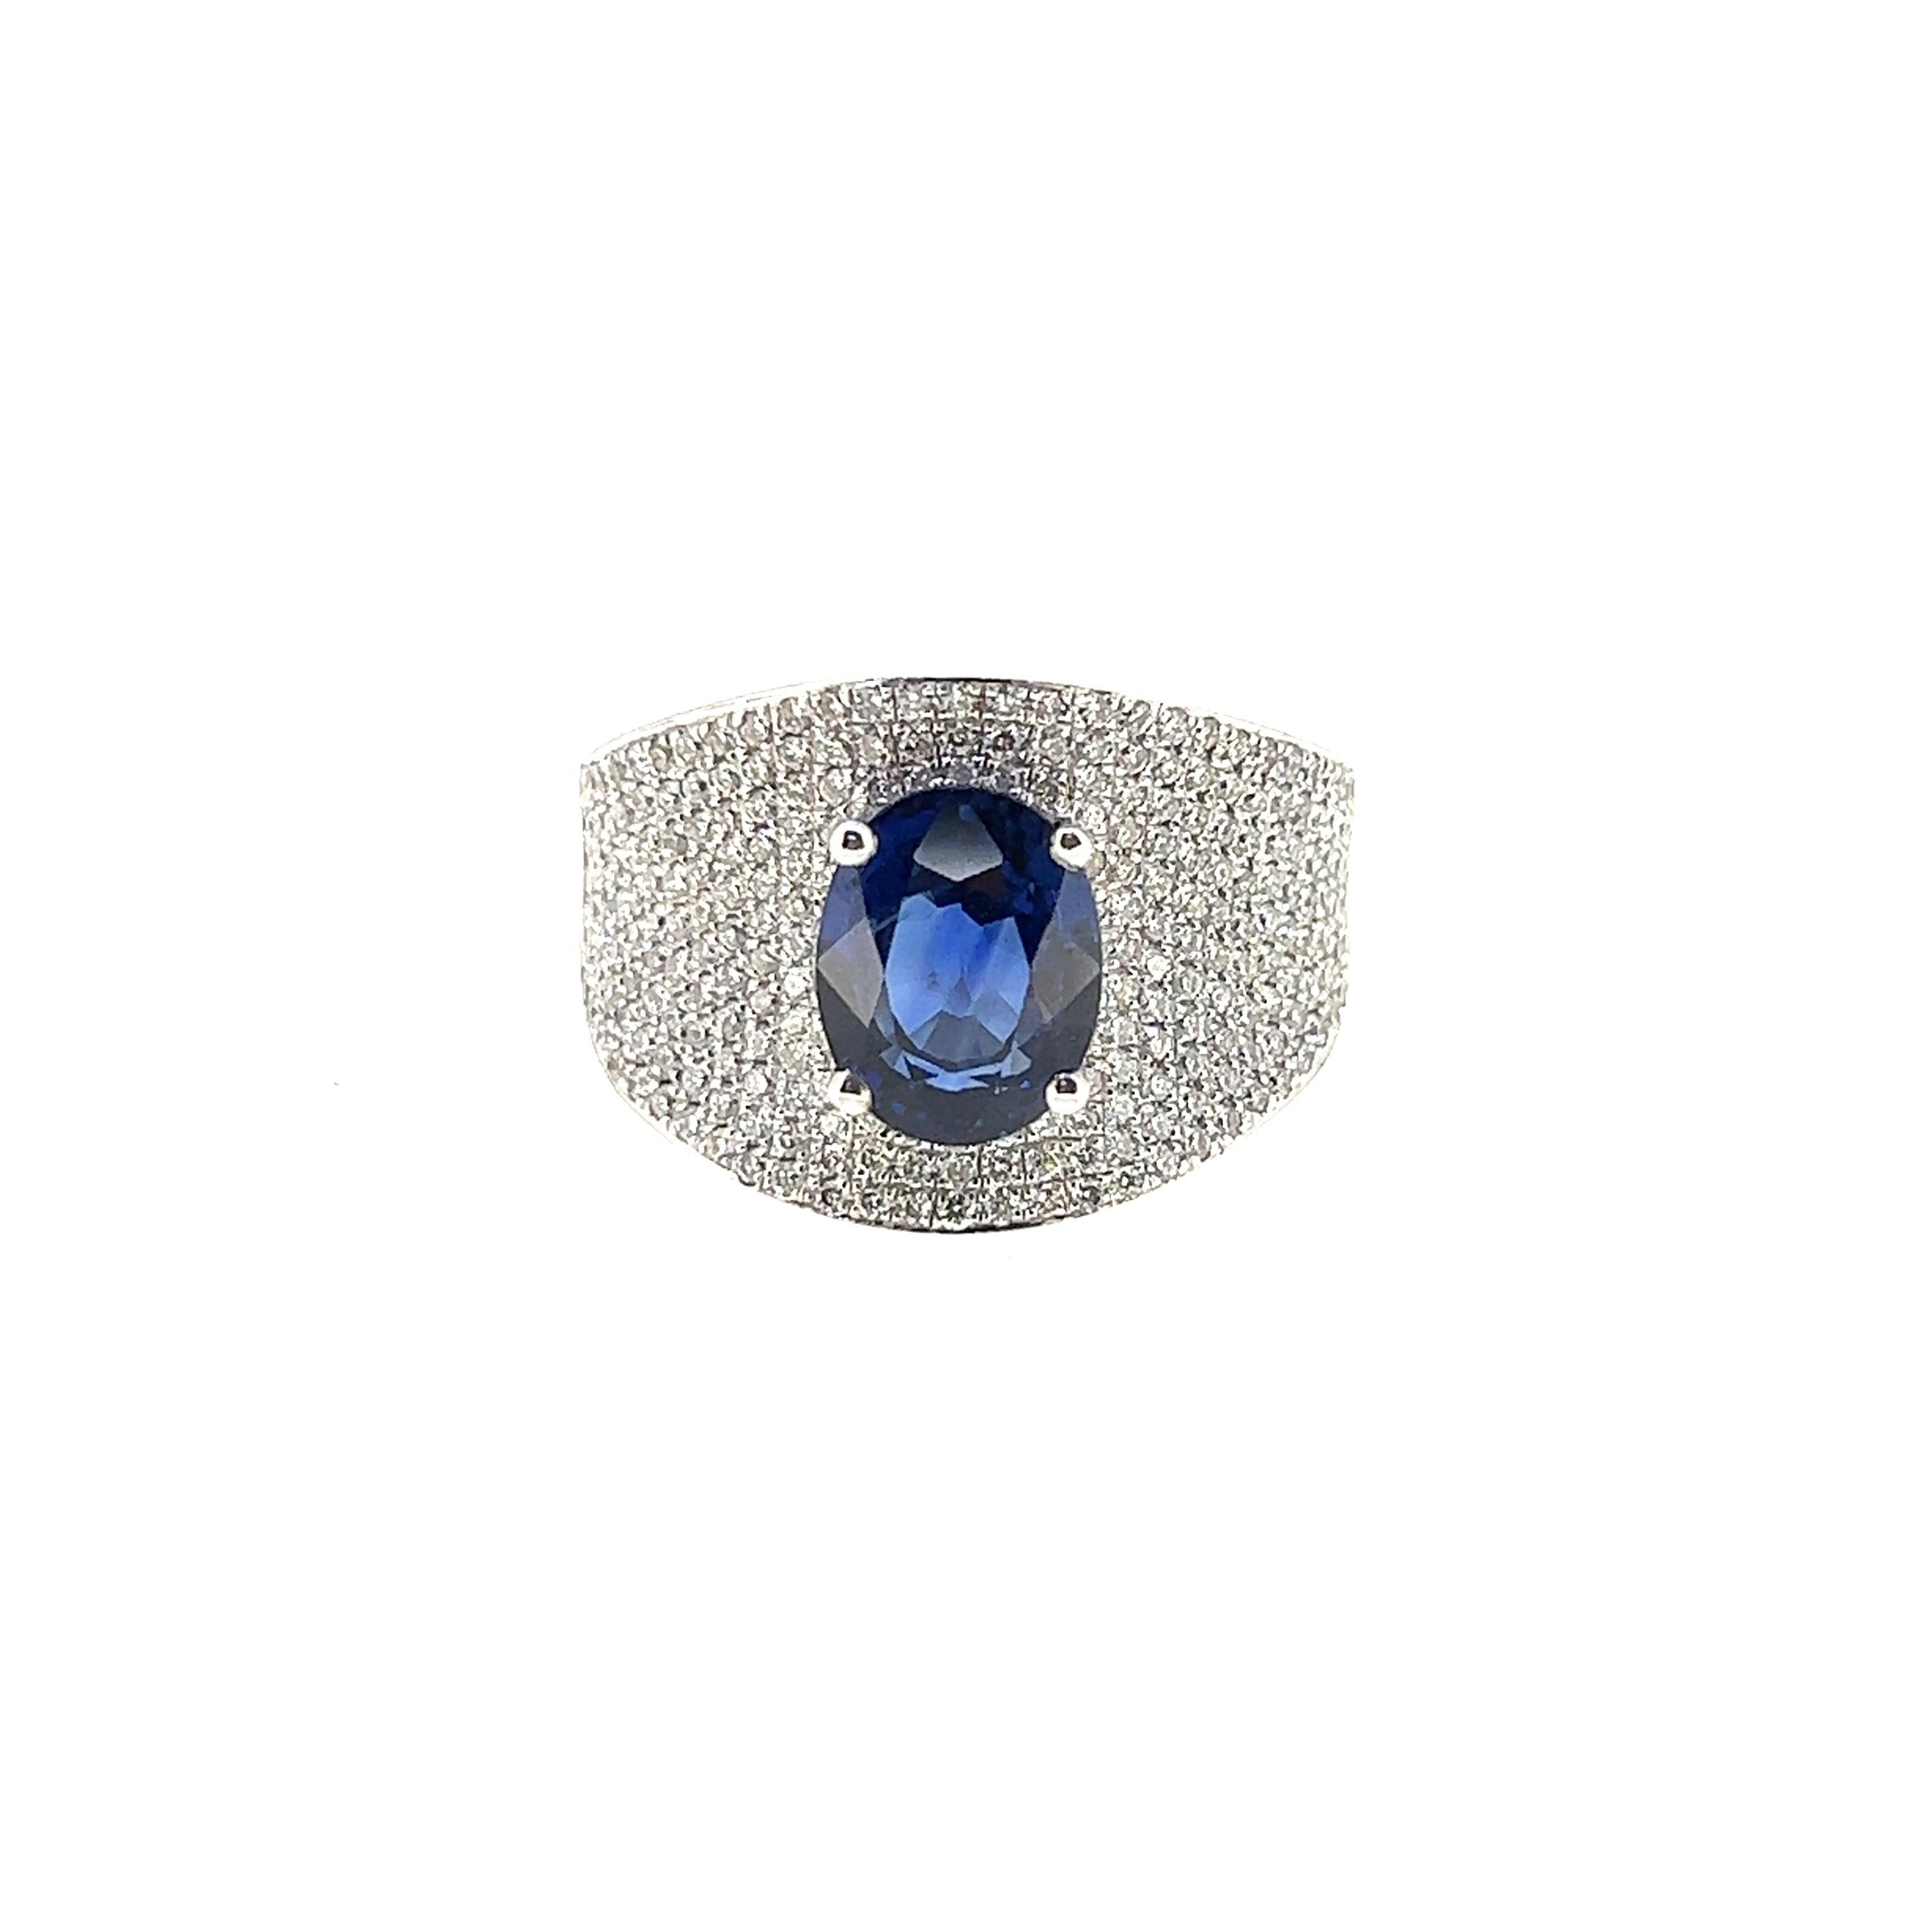 This 3.05 carats oval shaped Sapphire Ring is just simply beautiful. This remarkable piece features 251 pieces of Round Brilliant cut Diamonds weighing 0.89 carats set on 18 Karat White Gold. 

Sapphire: 3.05 carats
Diamond: 0.89 carats
Dimension: 